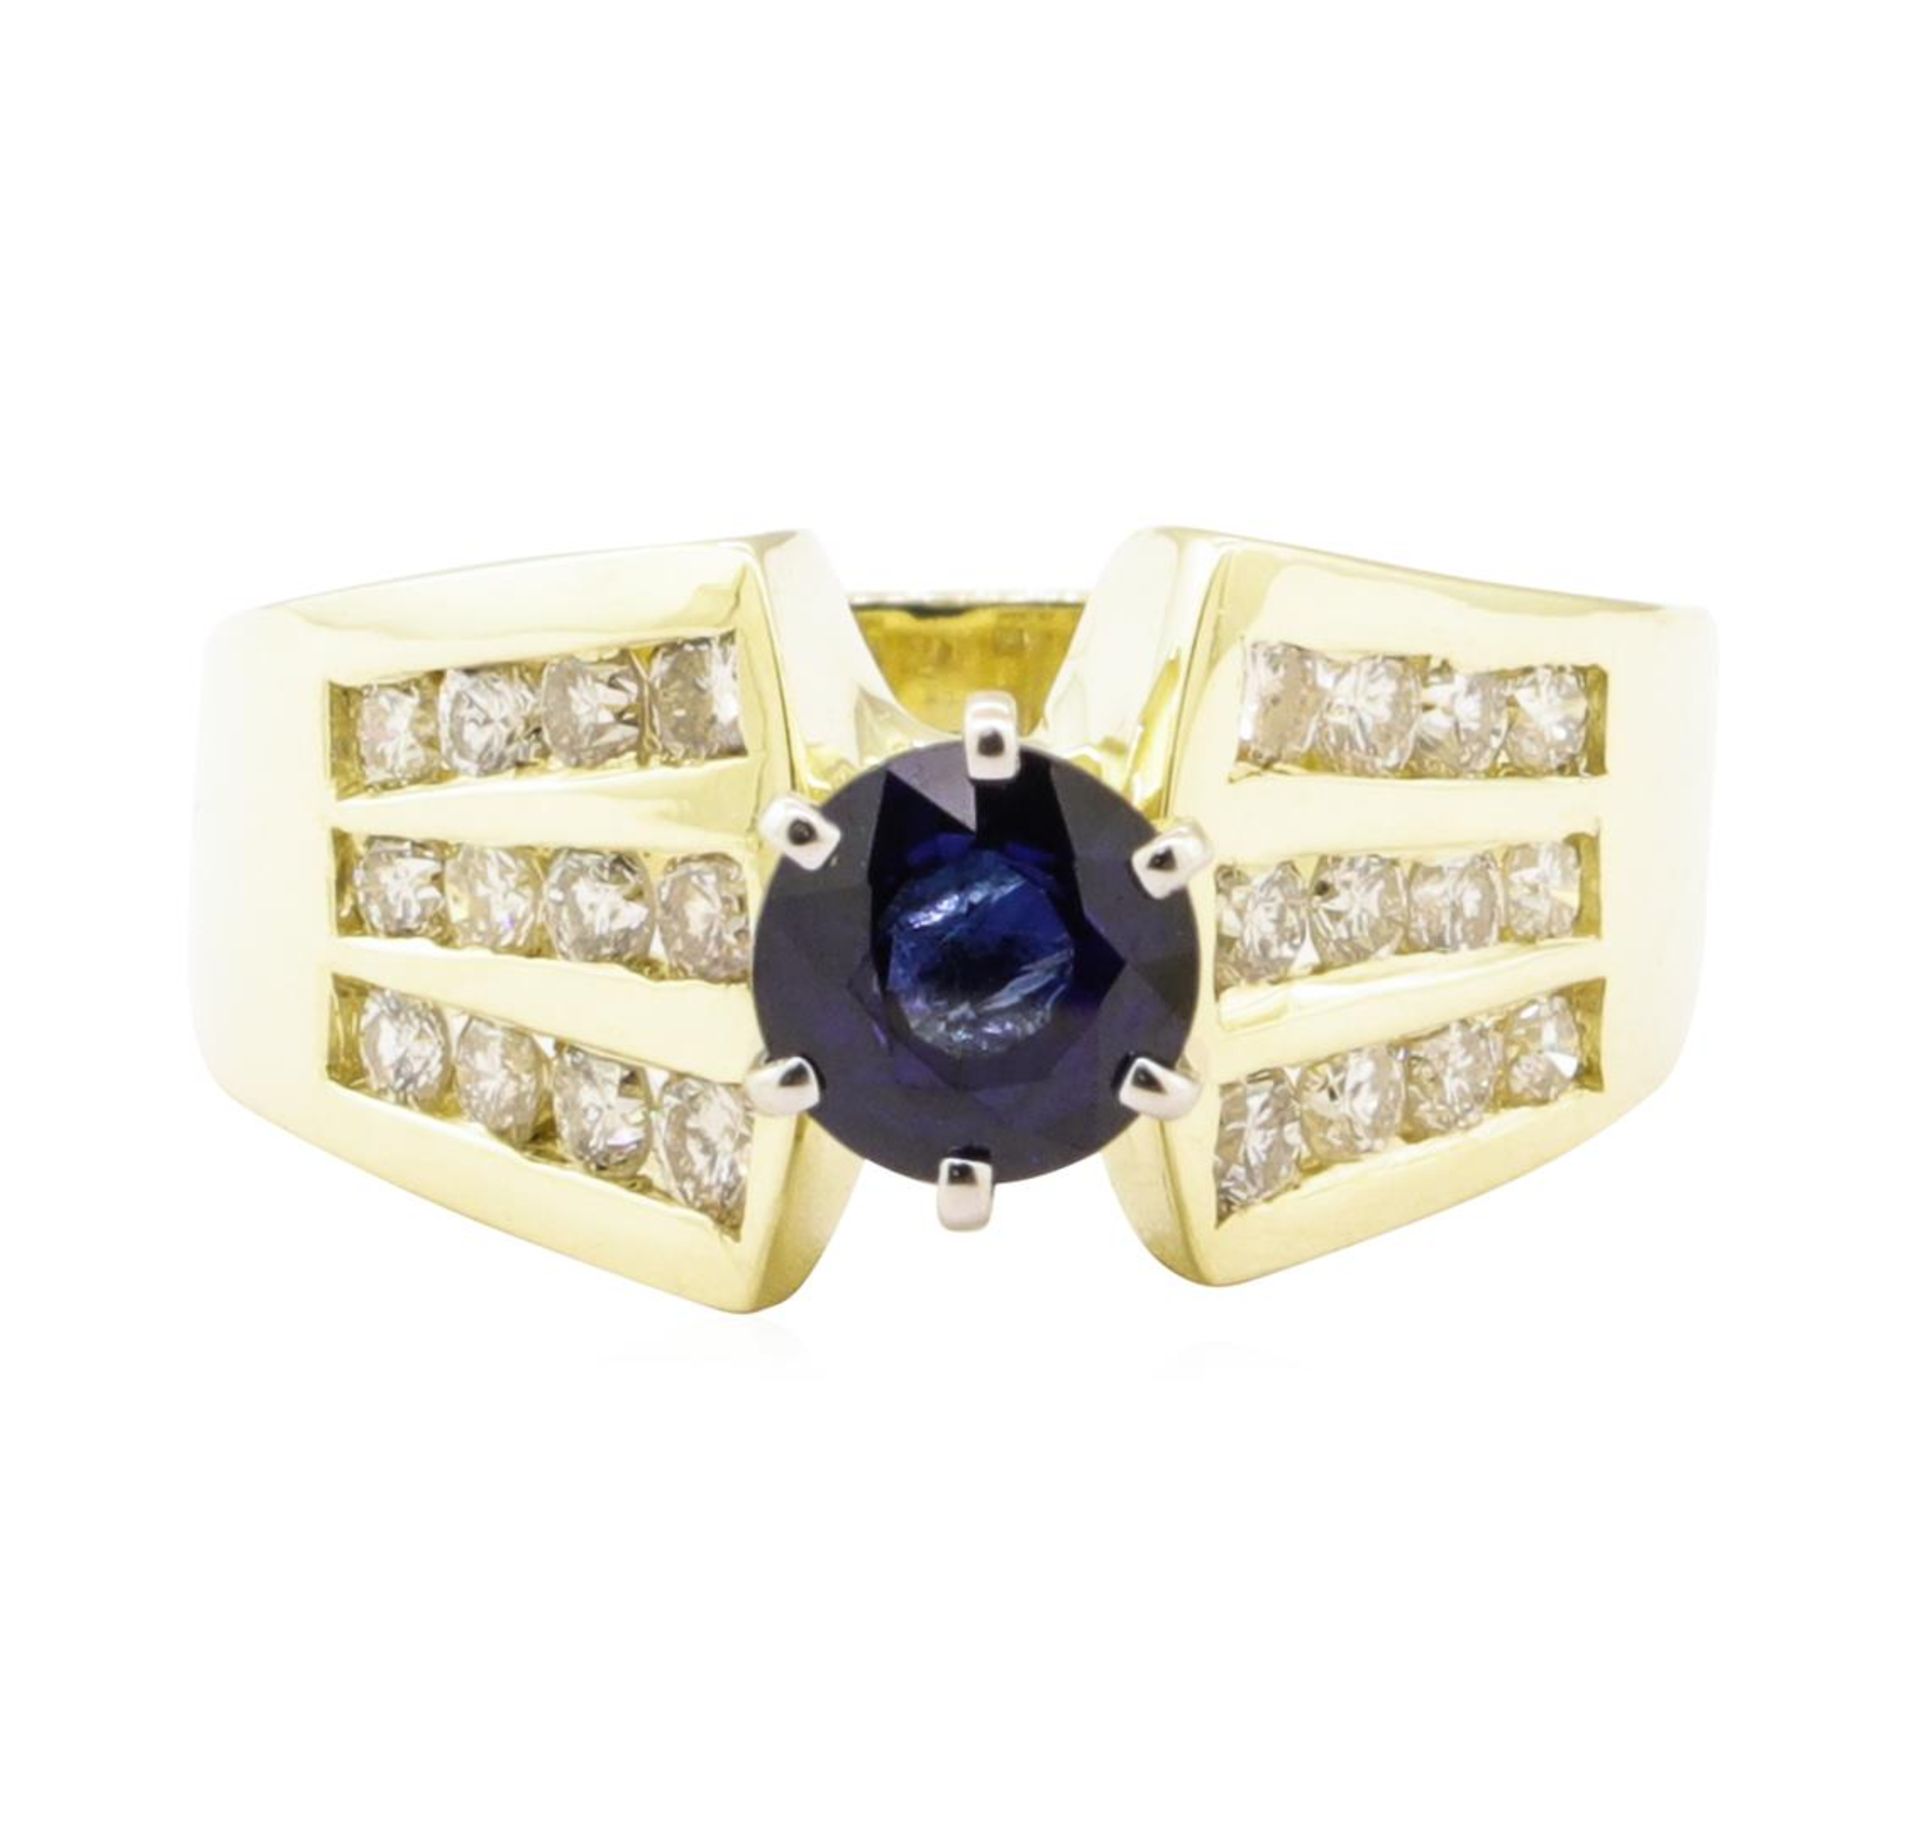 1.65 ctw Blue Sapphire And Diamond Ring - 14KT Yellow Gold - Image 2 of 5